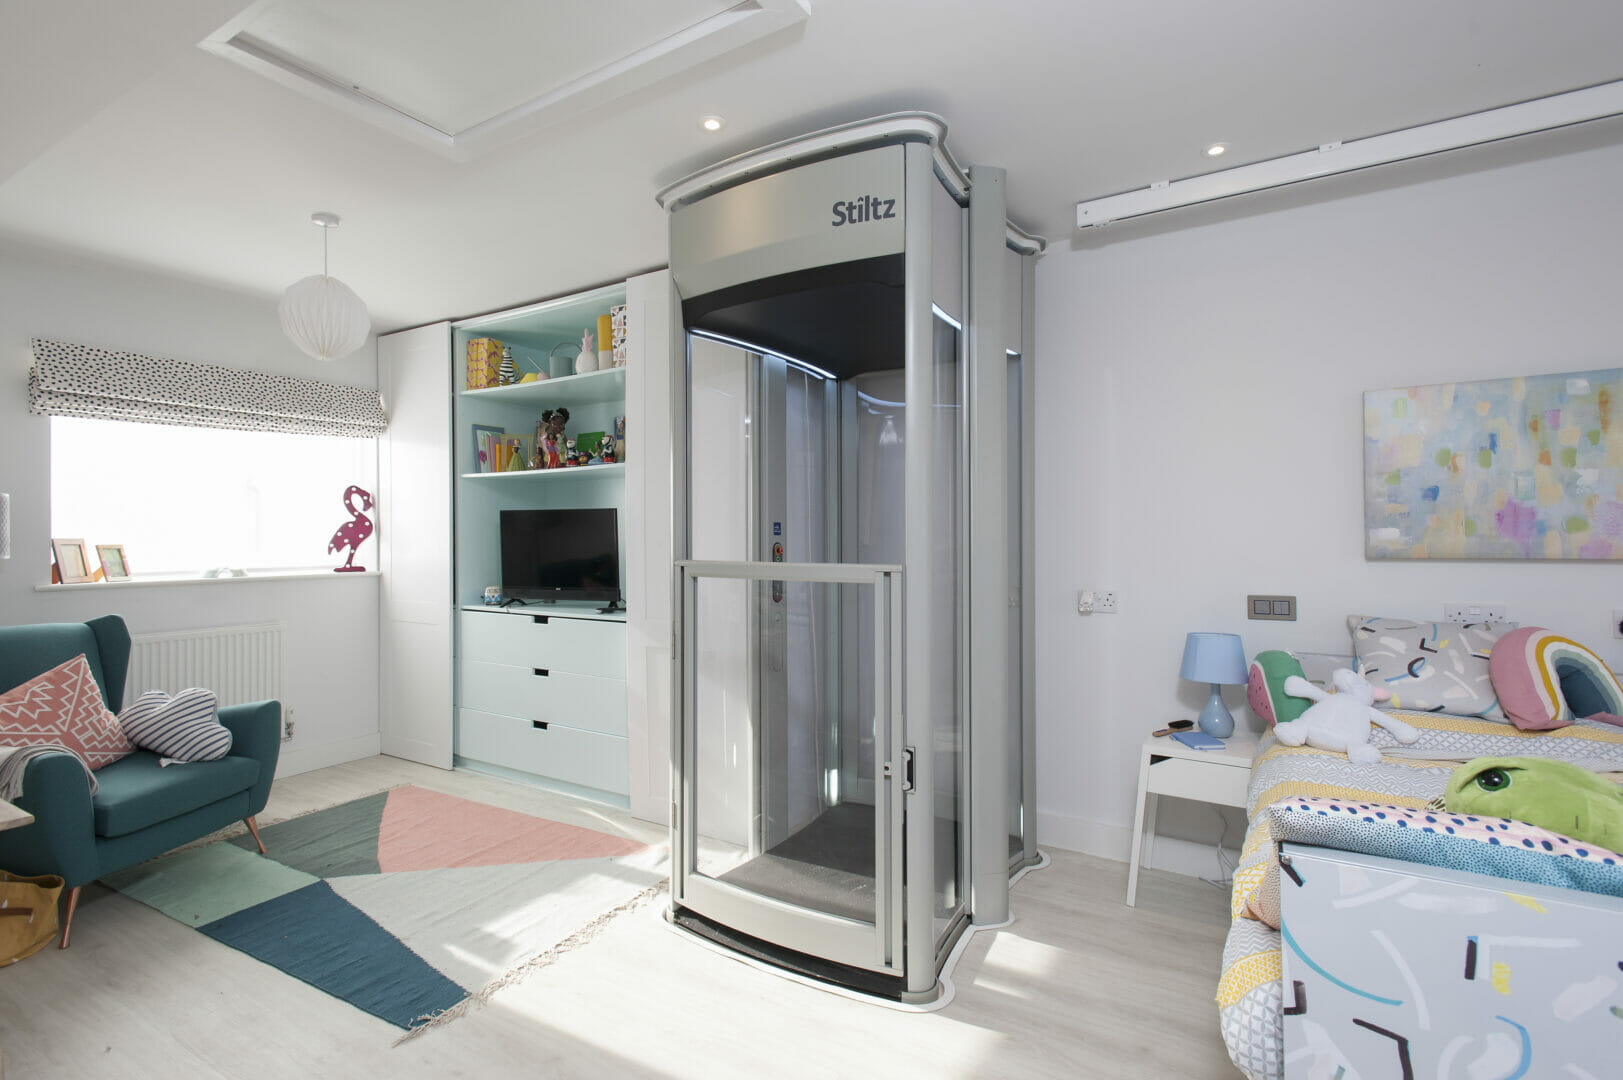 DESIGNERS AND ARCHITECTS CAN GO THE DISTANCE WITH  AS STILTZ AS THEIR HOMELIFTS REACH NEW HEIGHTS  @StiltzLifts